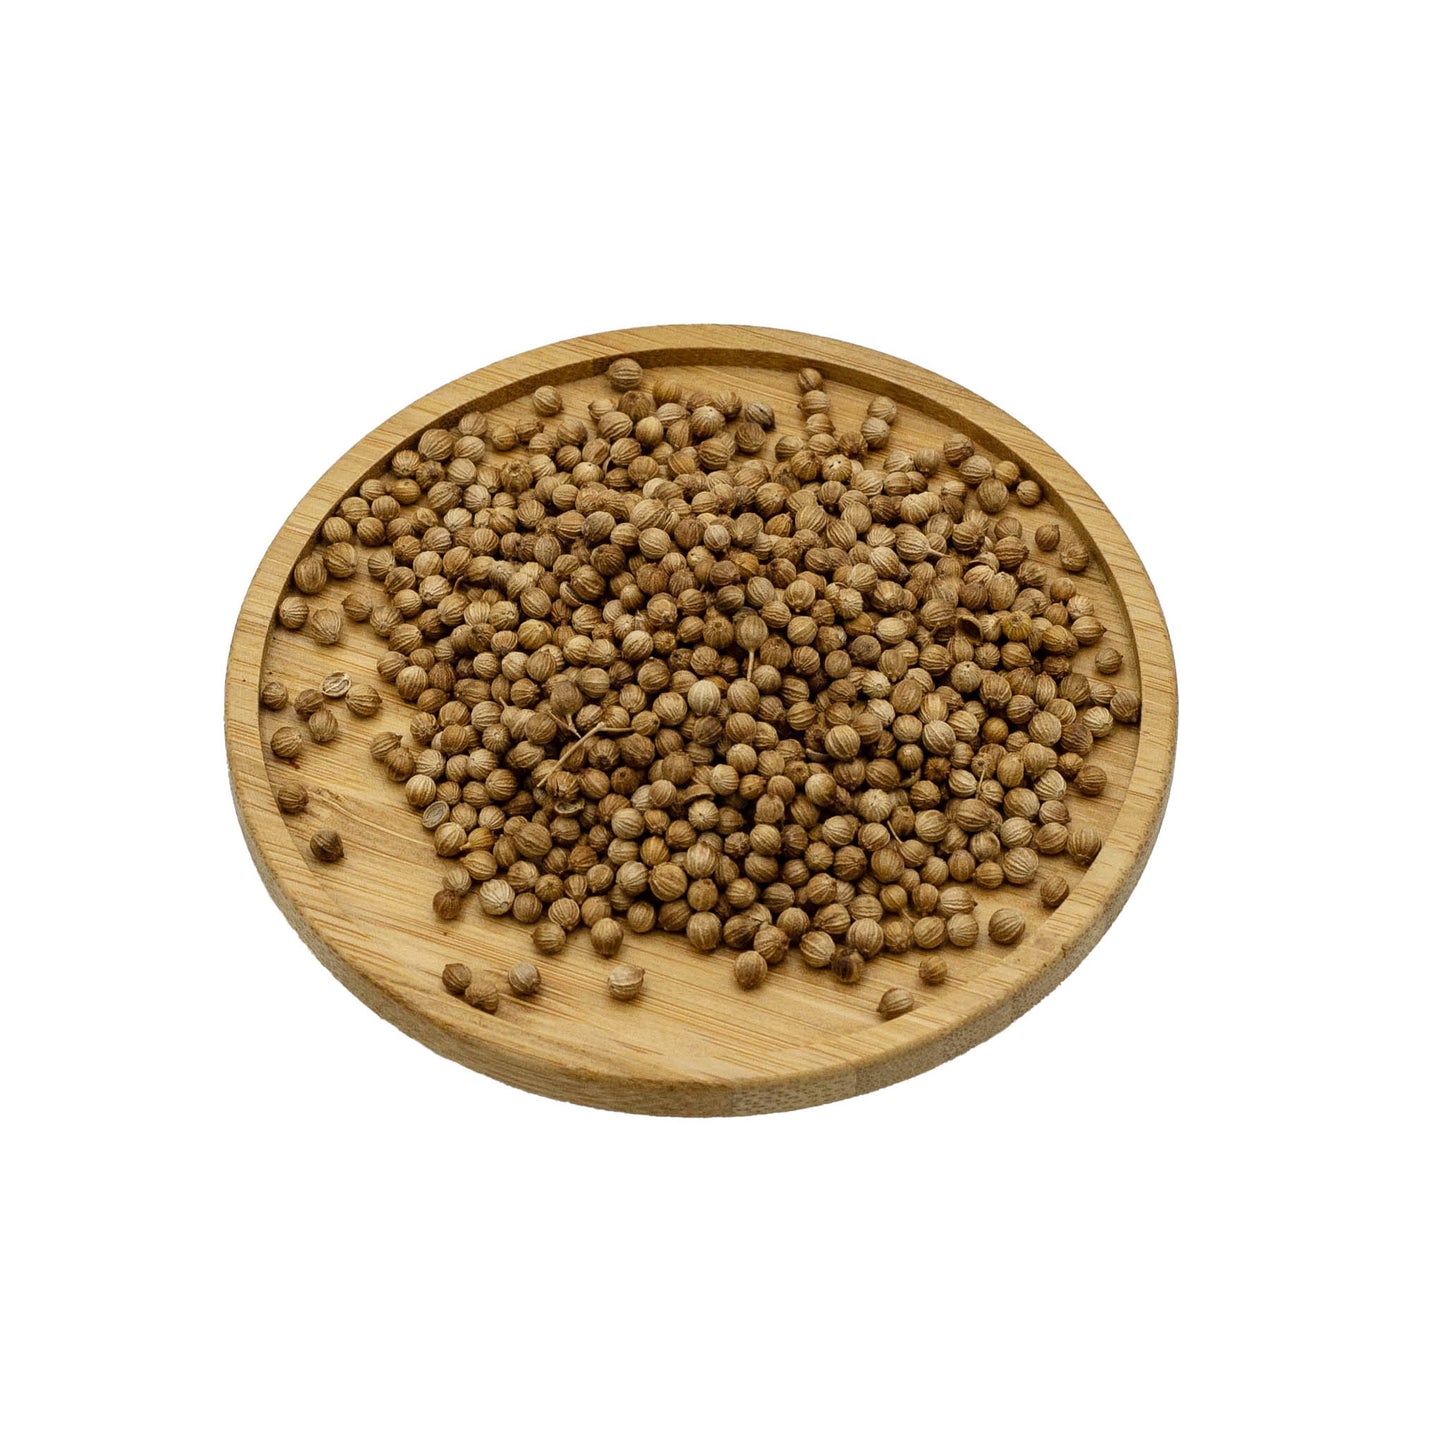 200g bag of whole coriander seeds